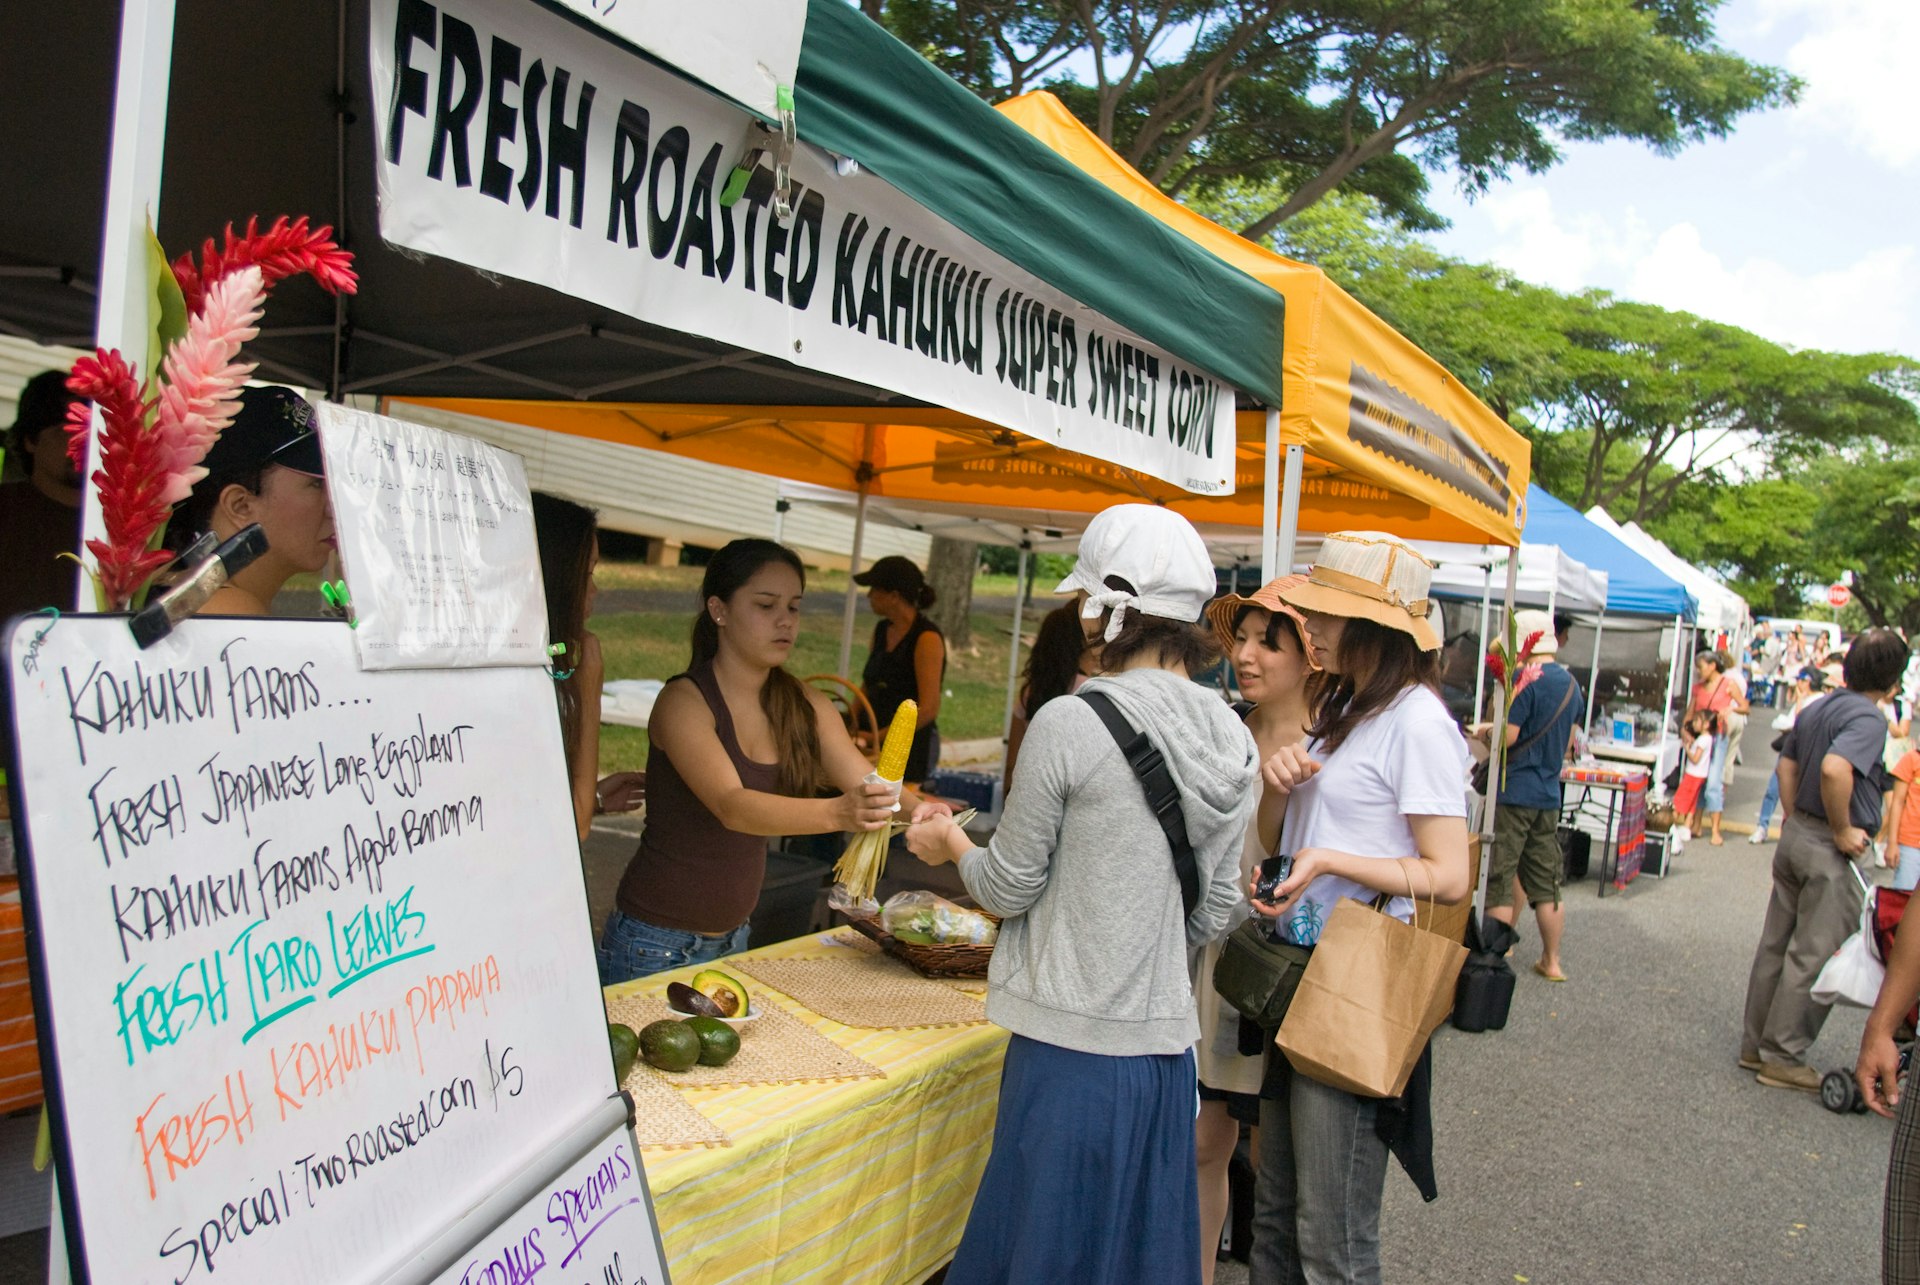 Weekly farmers markets are available all over the main islands, like this one in Honolulu. Image by Andrea Sperling / Lonely Planet Images / Getty